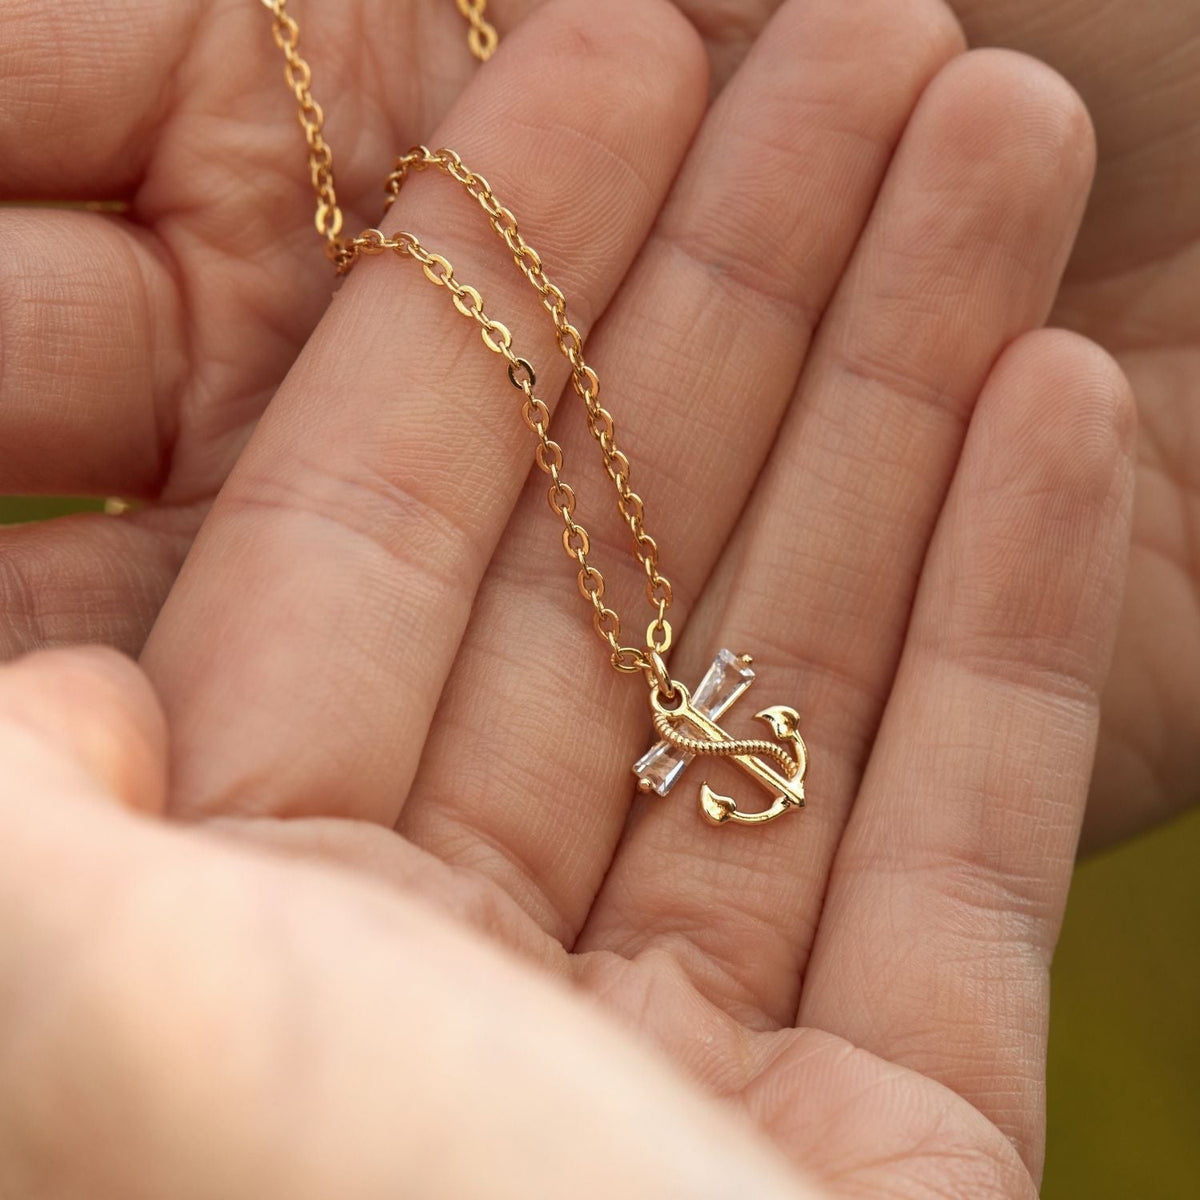 Grandmother &amp; Granddaughter | Special Bond That Spans the Years | Anchor Necklace